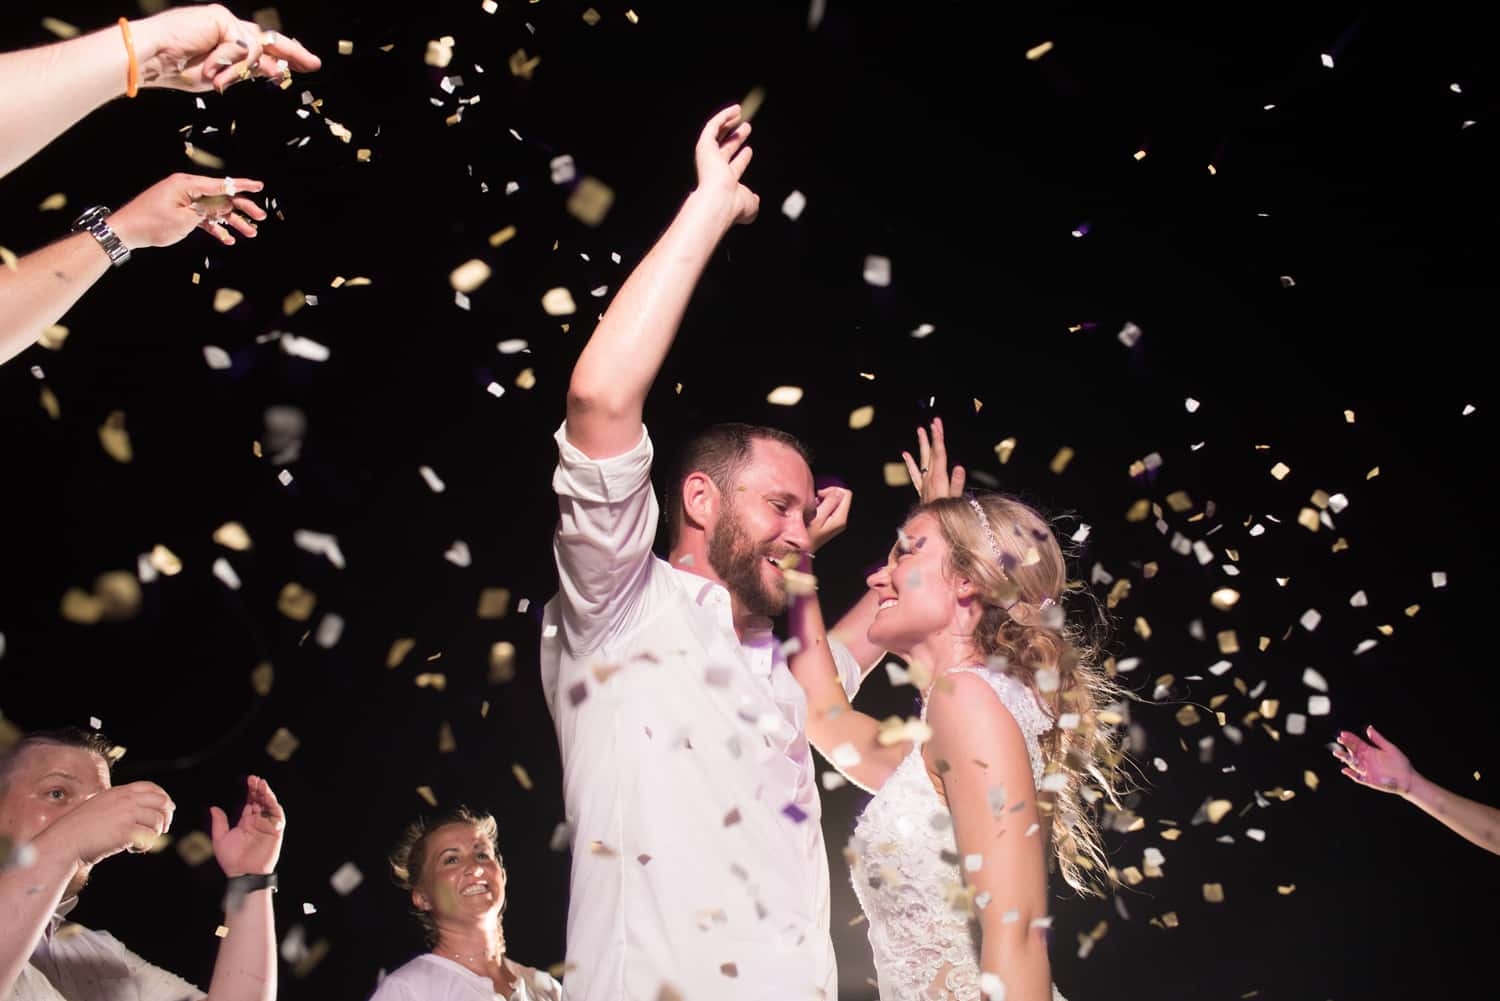 Bride and groom dancing with confetti during wedding reception